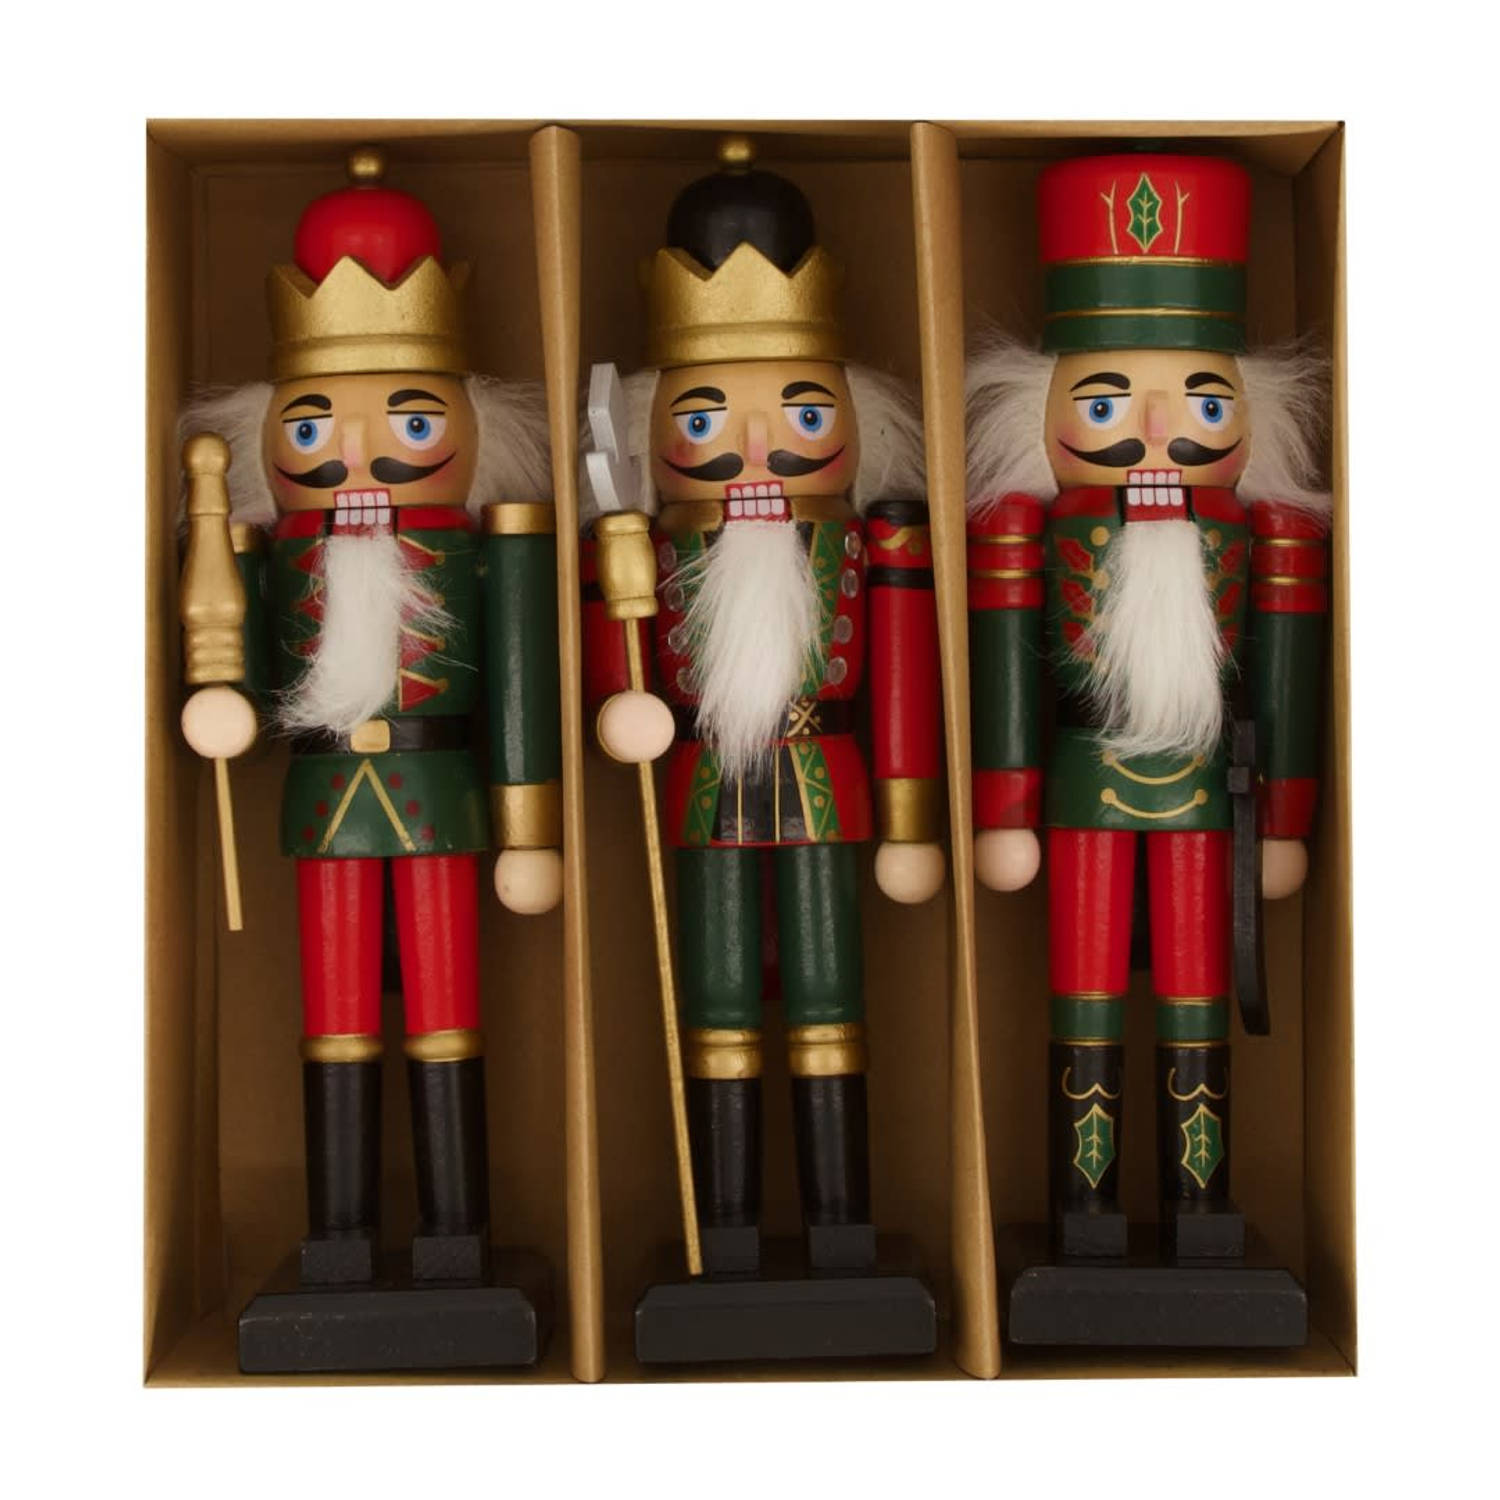 Dijk Natural Collections - Figurine nutrcracker wood 24x7x26cm 3pc in box - Rood